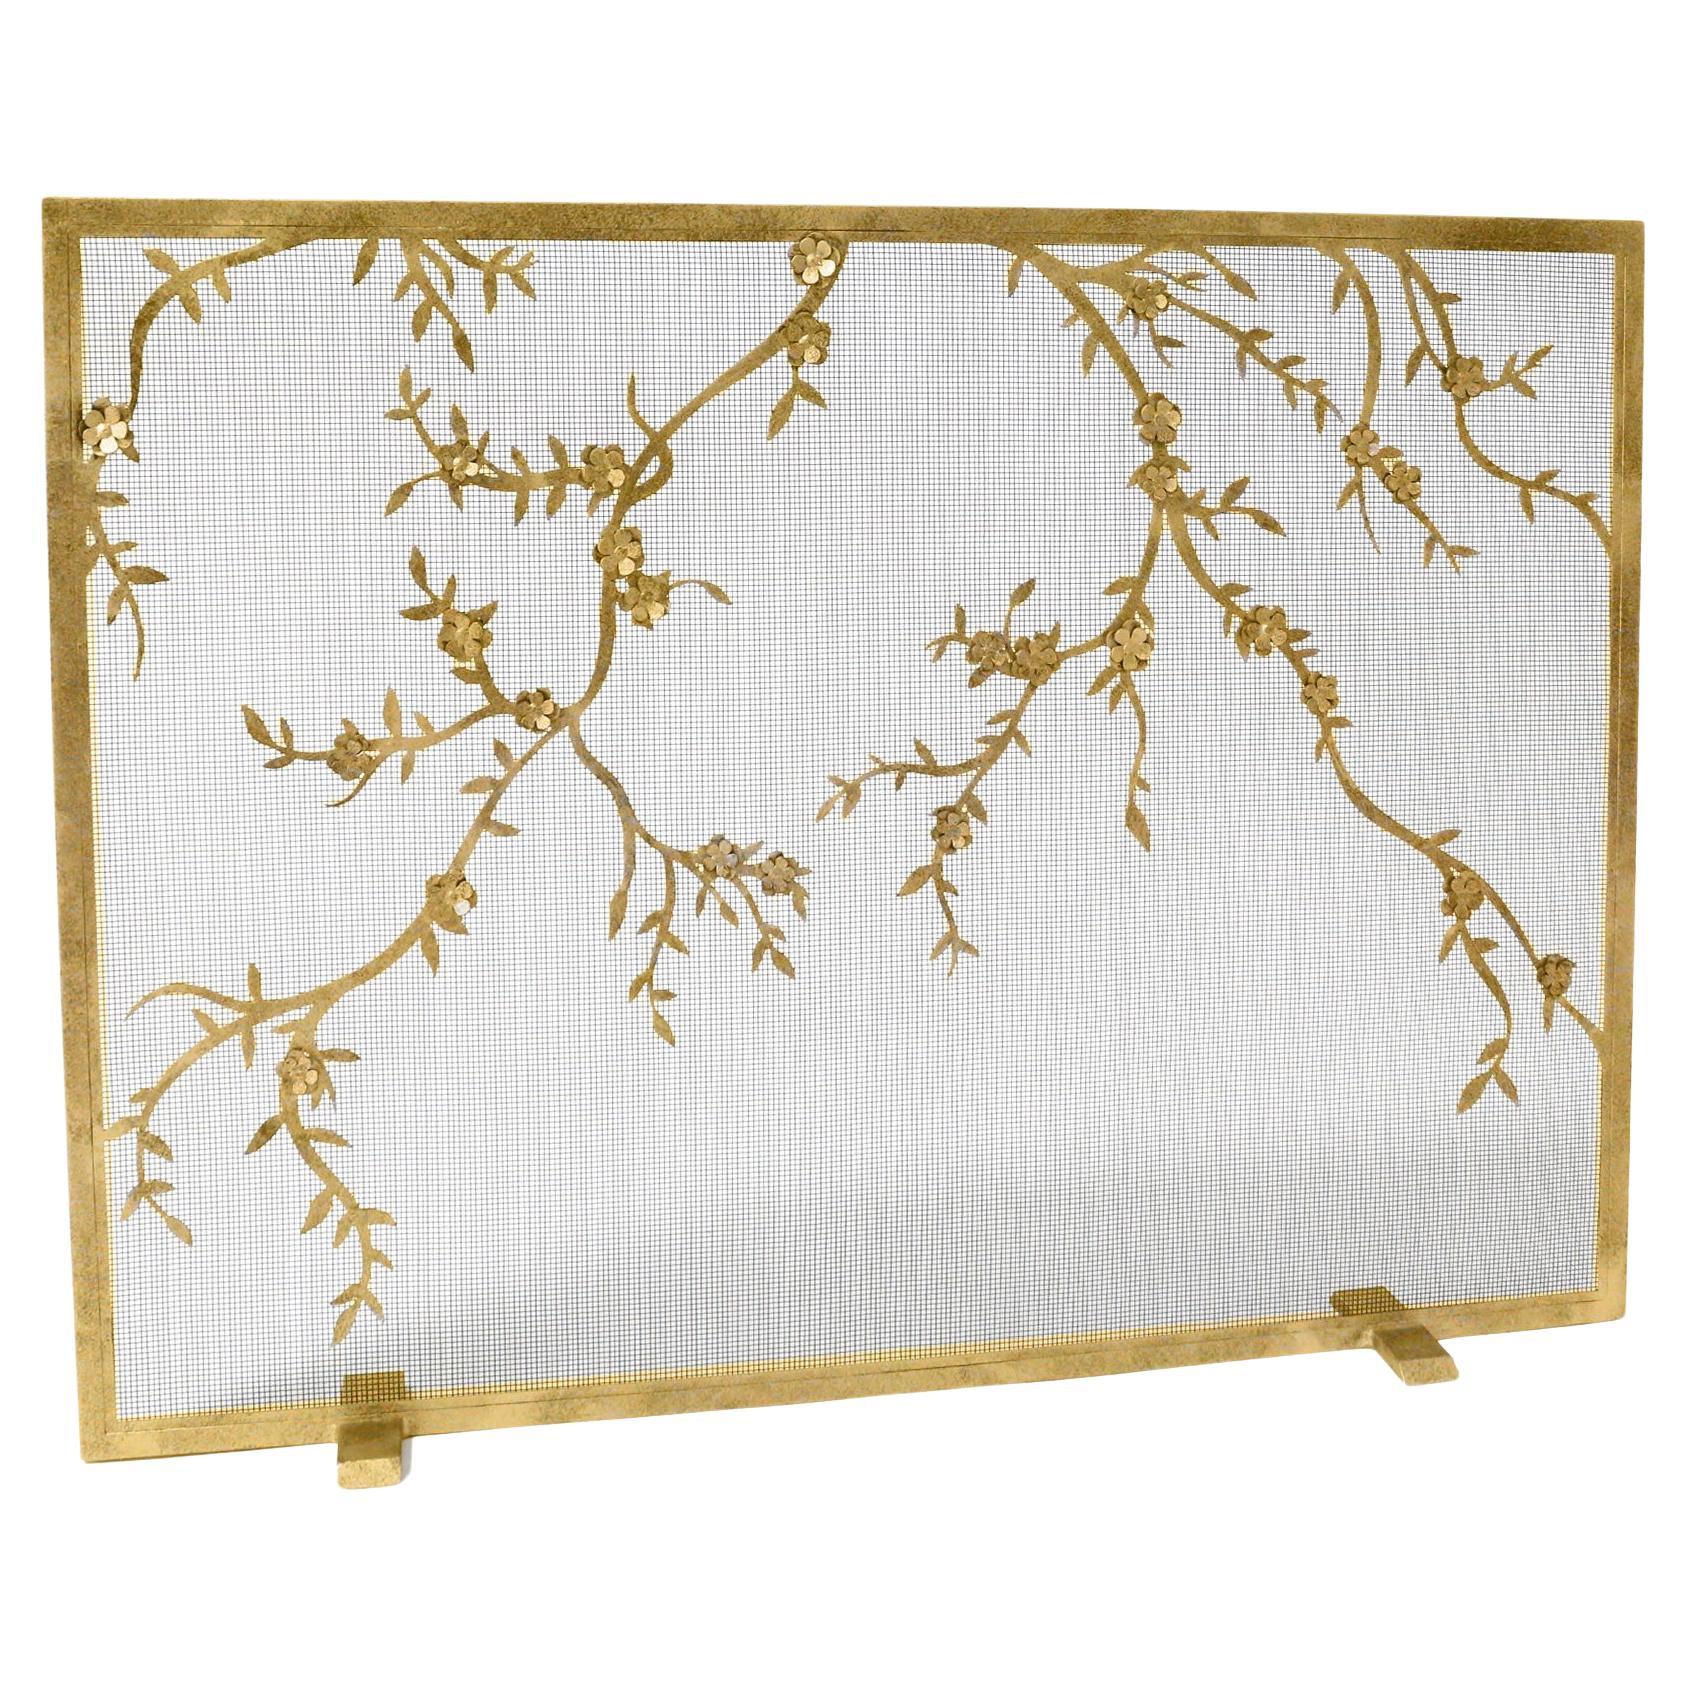 Plum Blossom Fireplace Screen in Brilliant Gold